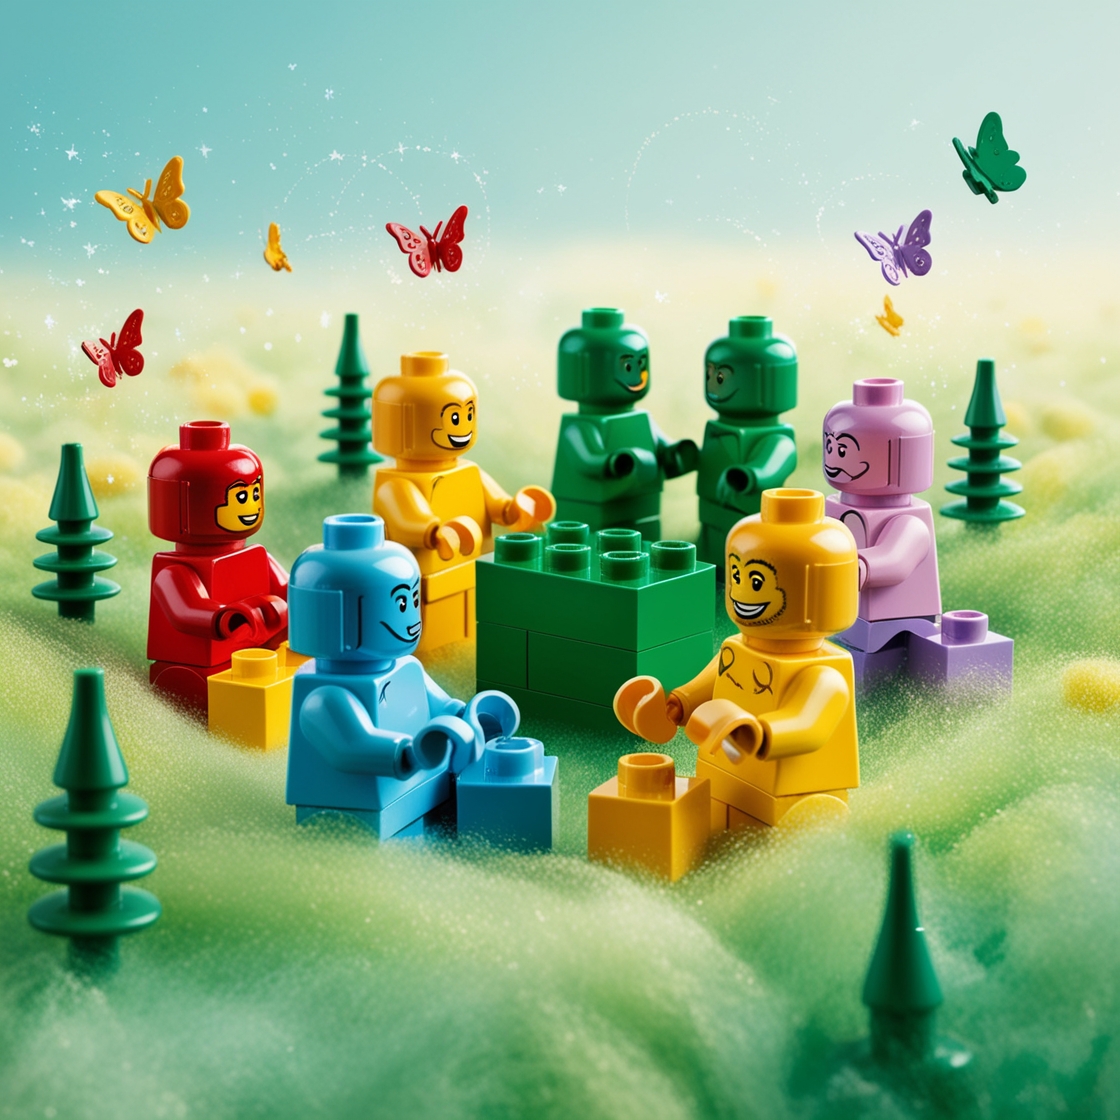 Default_Vibrant_Lego_figurines_as_subjects_crafted_from_intric_3 (2).jpg